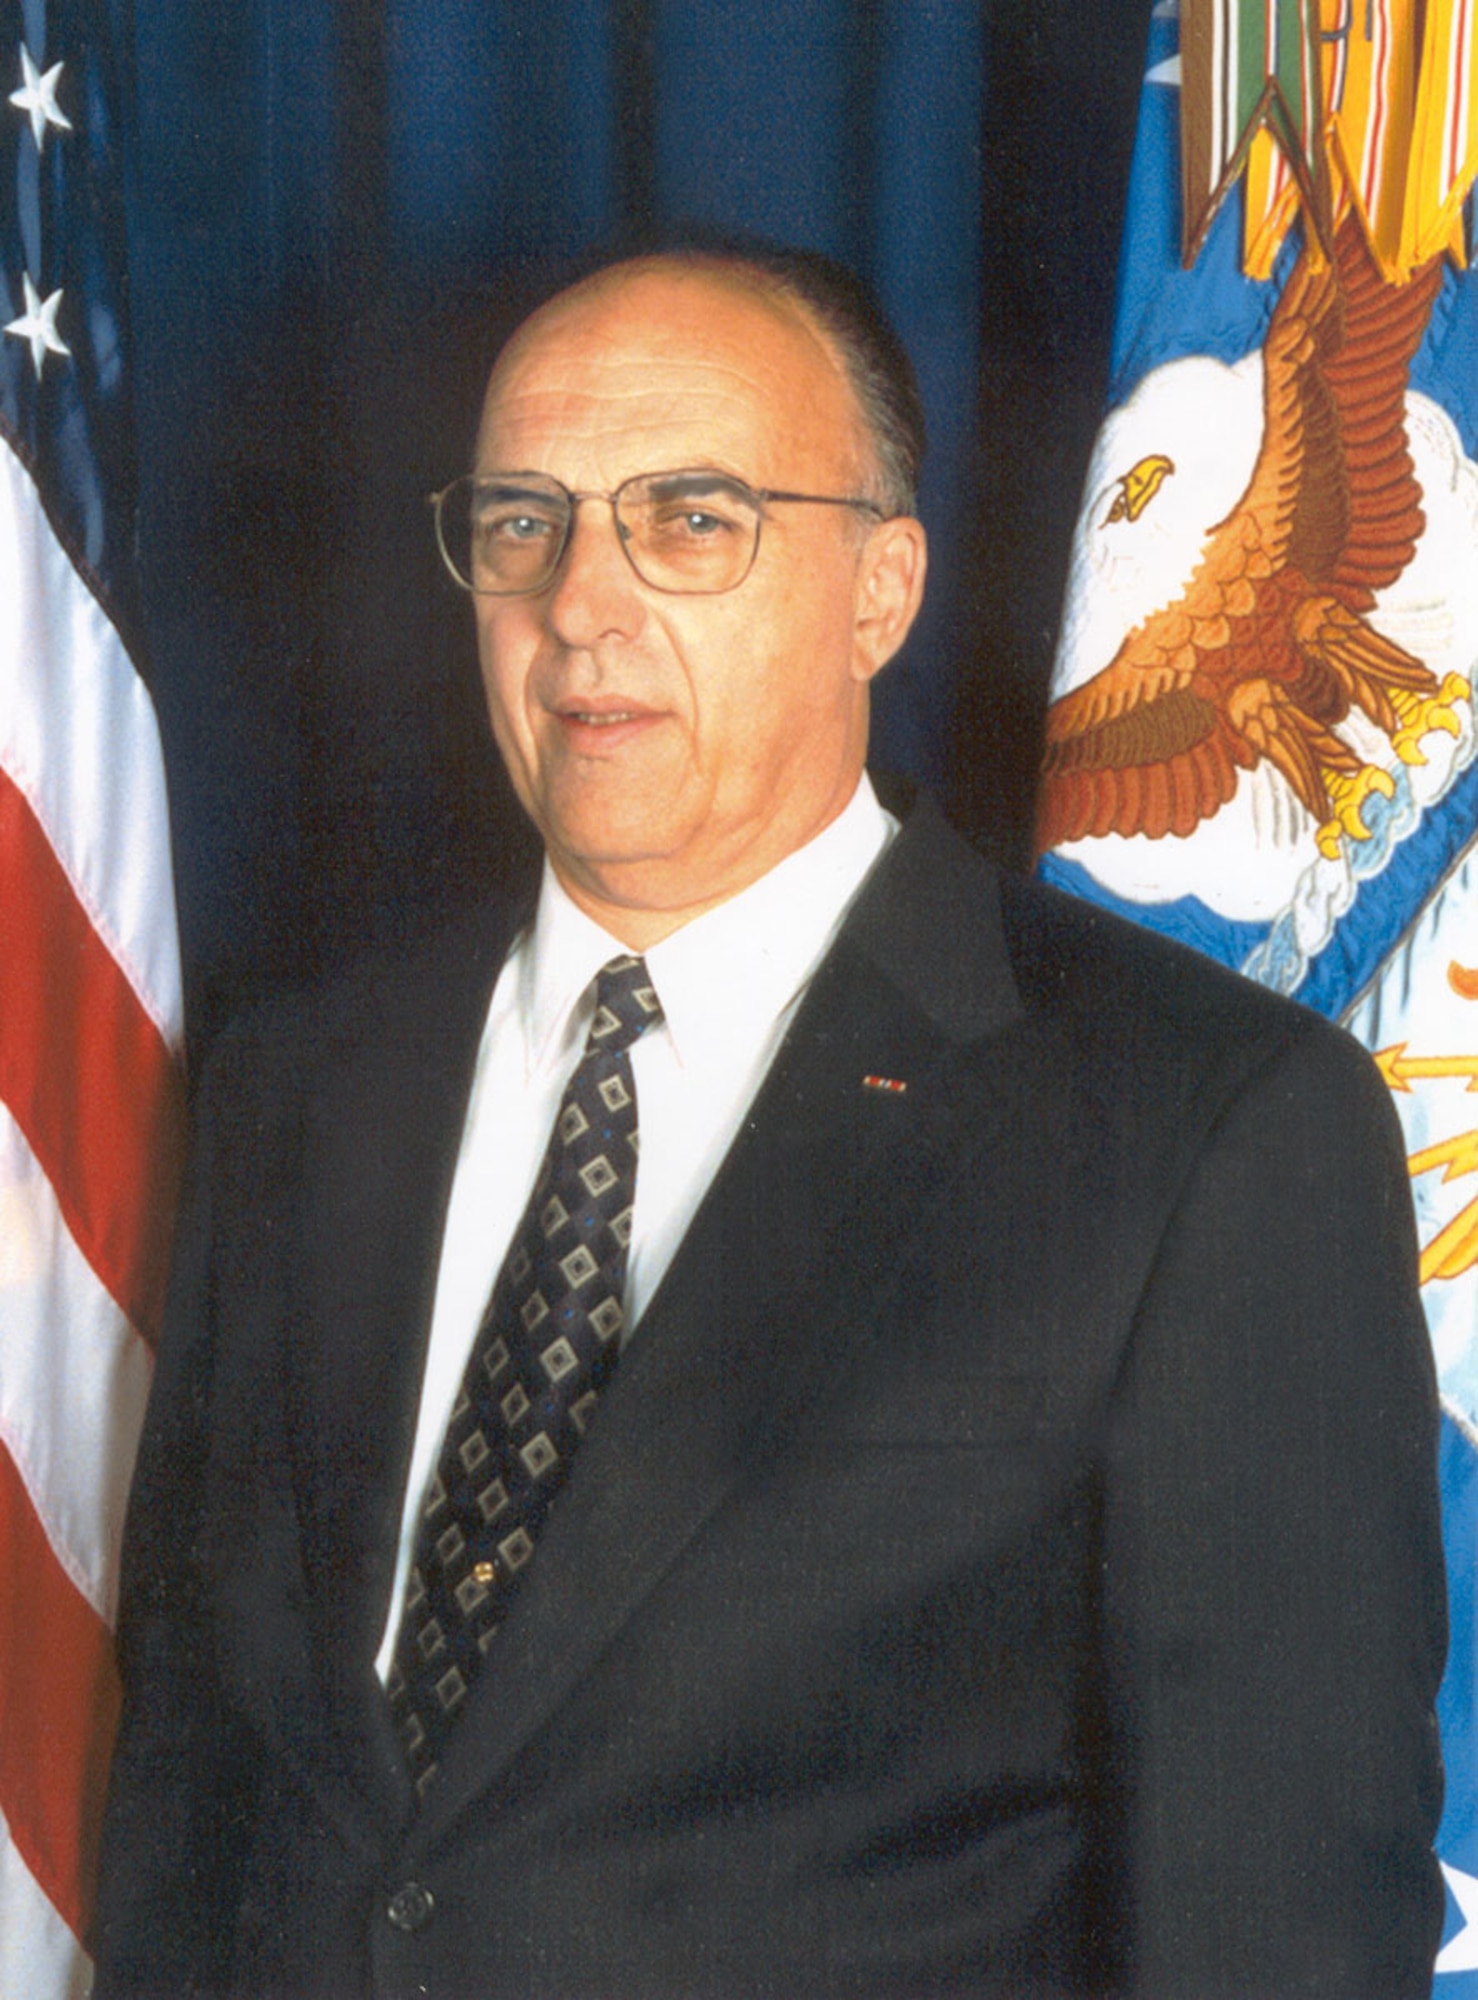 Terry Aitken, Senior Curator at the National Museum of the United States Air Force. (U.S. Air Force photo)